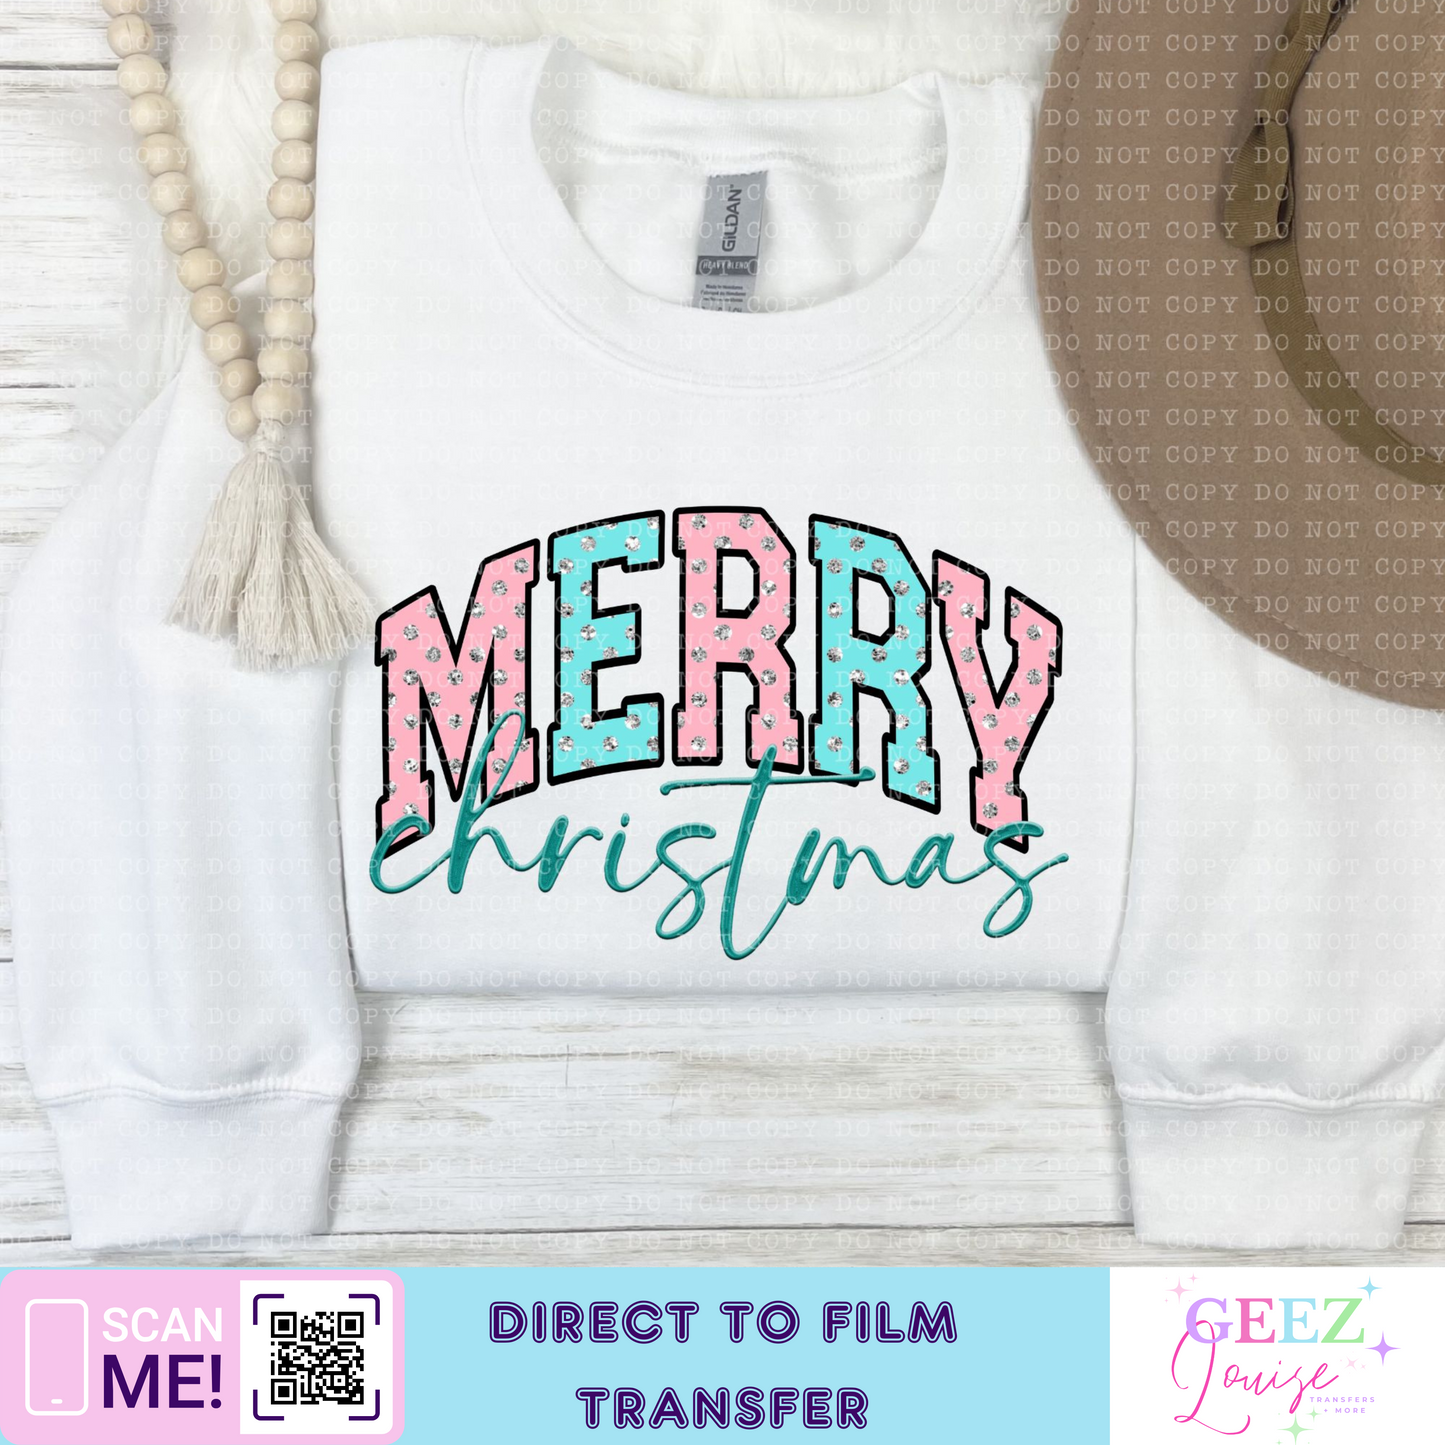 Merry faux sequin Christmas - Direct to Film Transfer - made to order